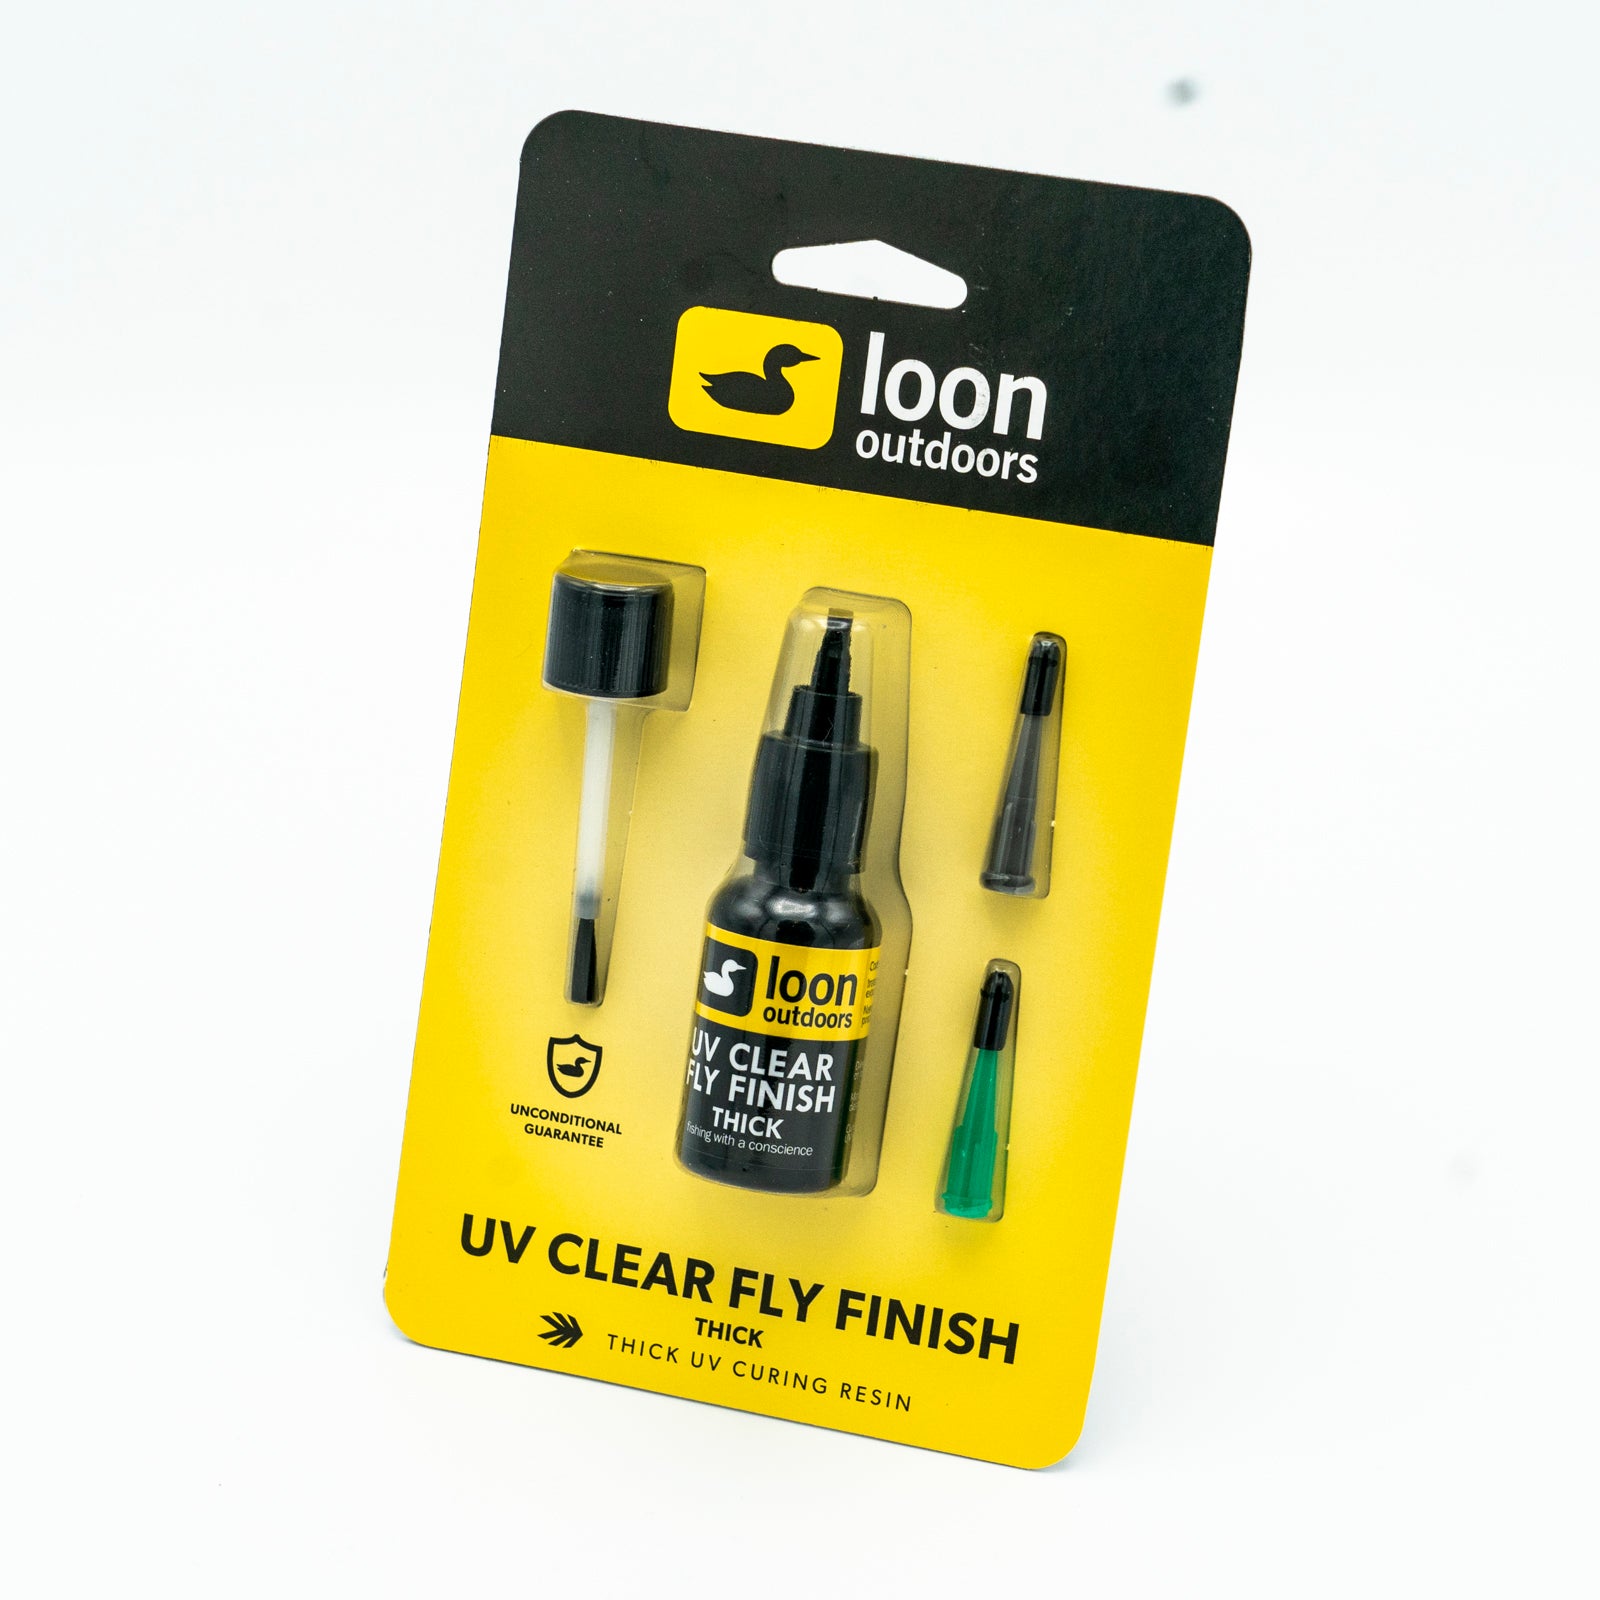 Loon UV Clear Fly Finish - Thick